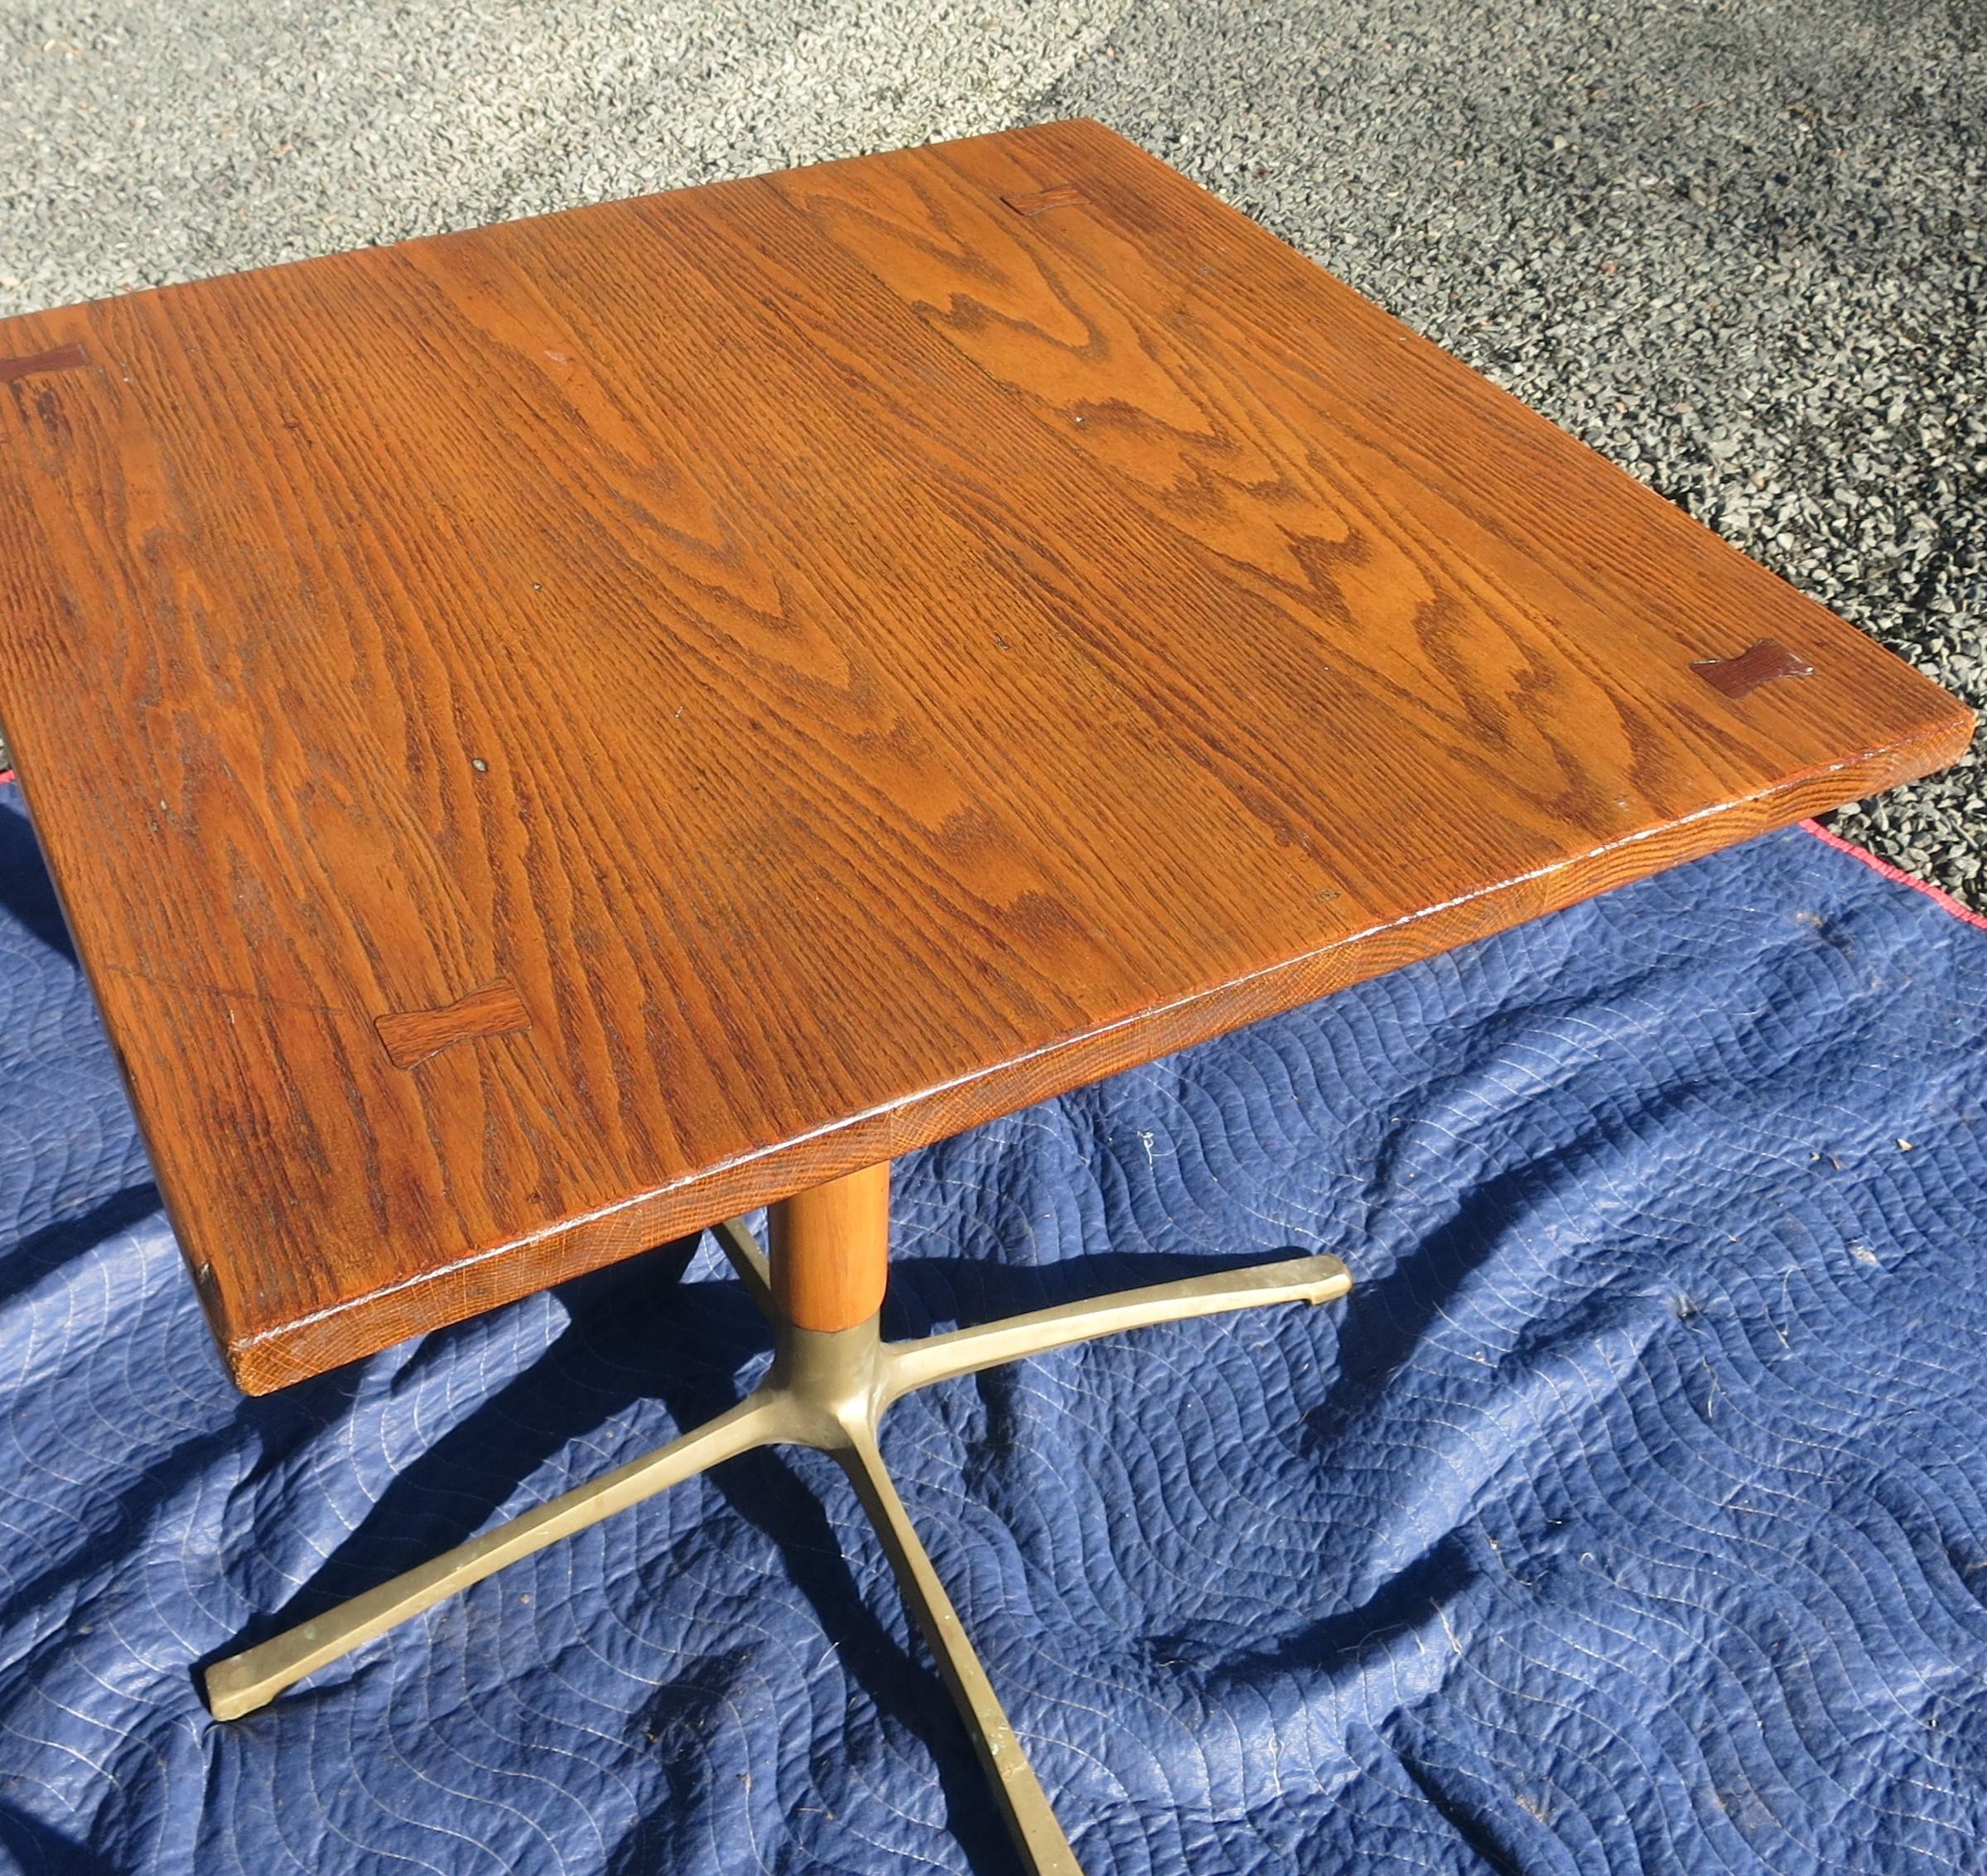 Nice oak top table with associated base. Base has brass feet. The top is 29